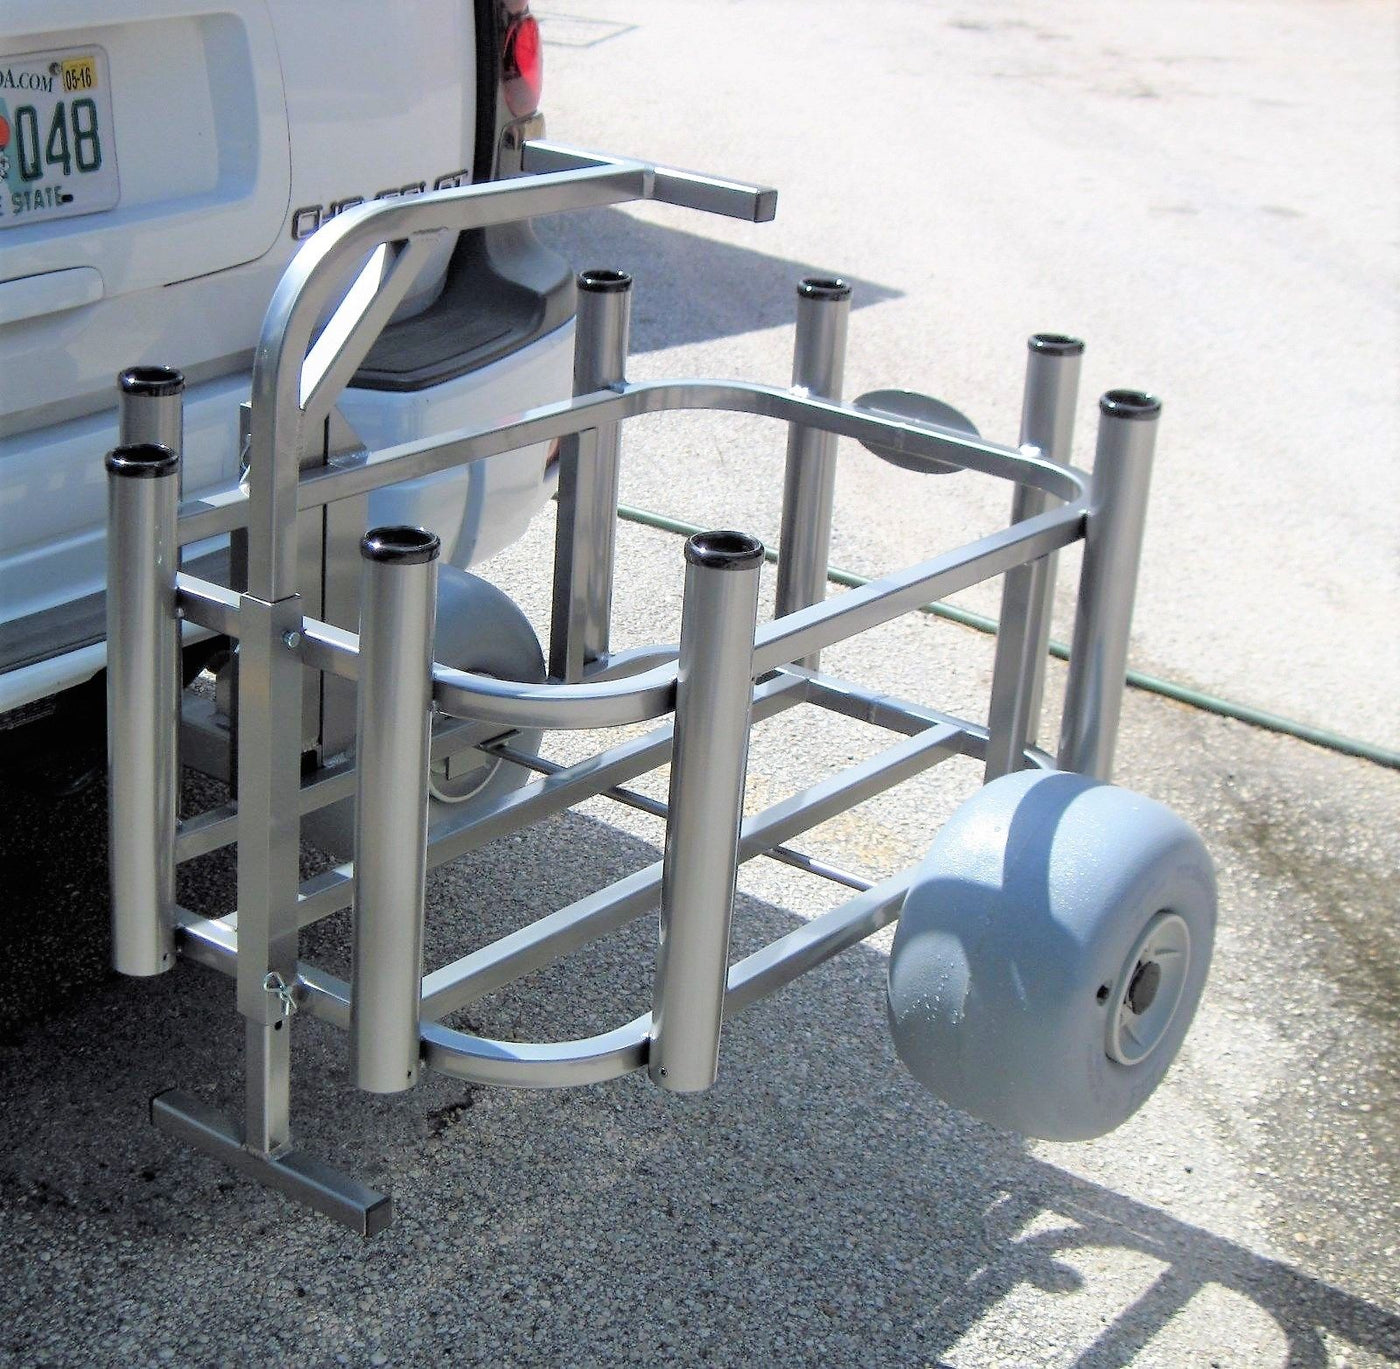 Aluminum Beach Fishing Cart with Detachable Receiver Hitch - FREE SHIPPING